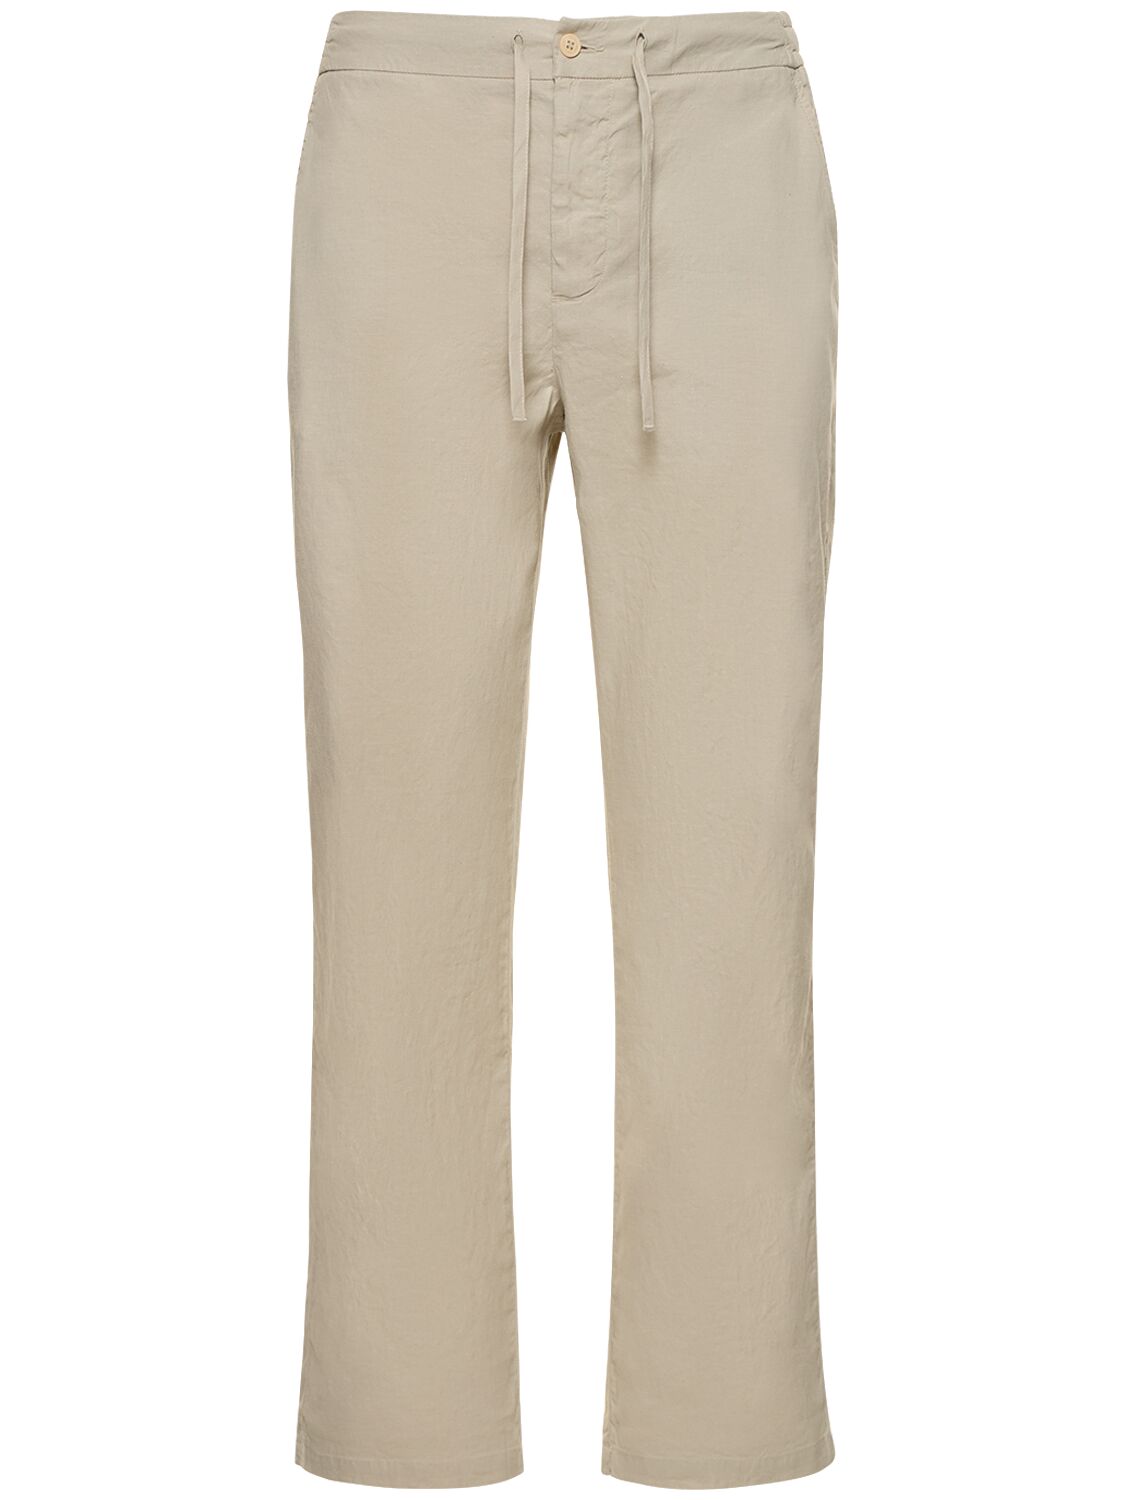 Frescobol Carioca Mendes Linen & Cotton Stretch Pants In Olive Green